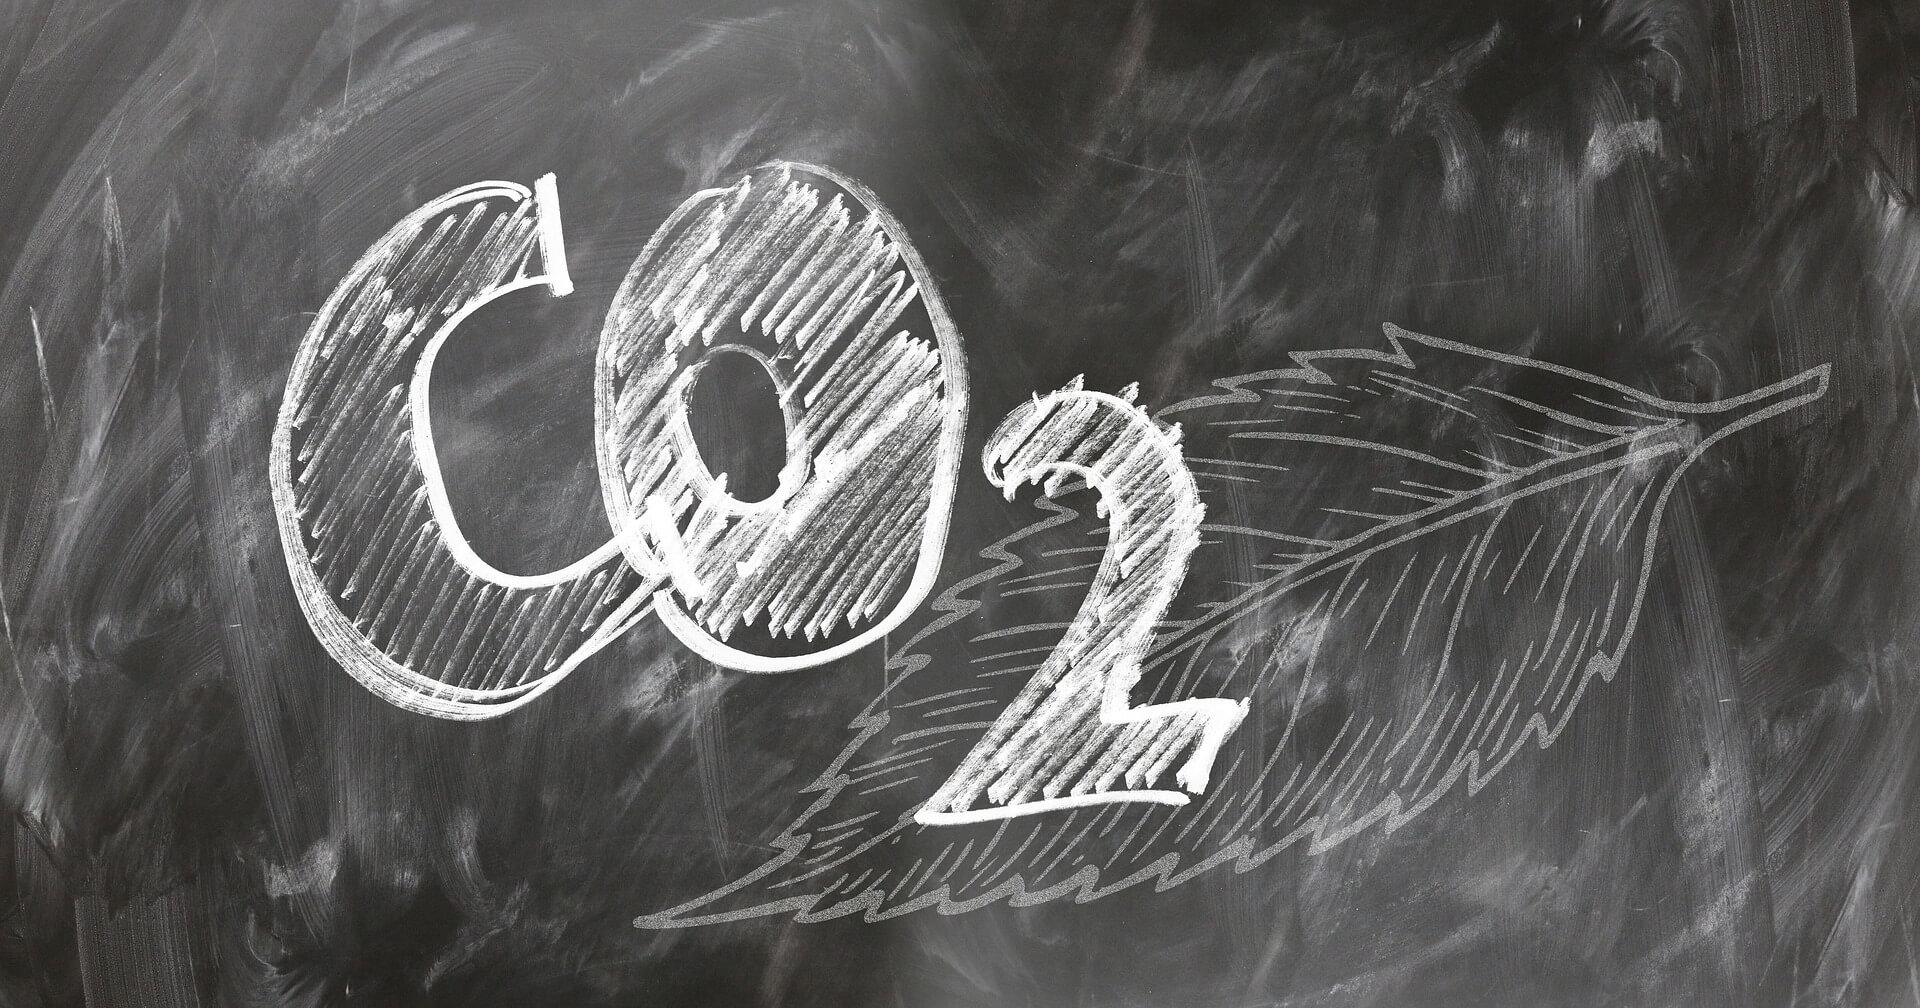 10 Characteristics Of Carbon dioxide - What are the Features?